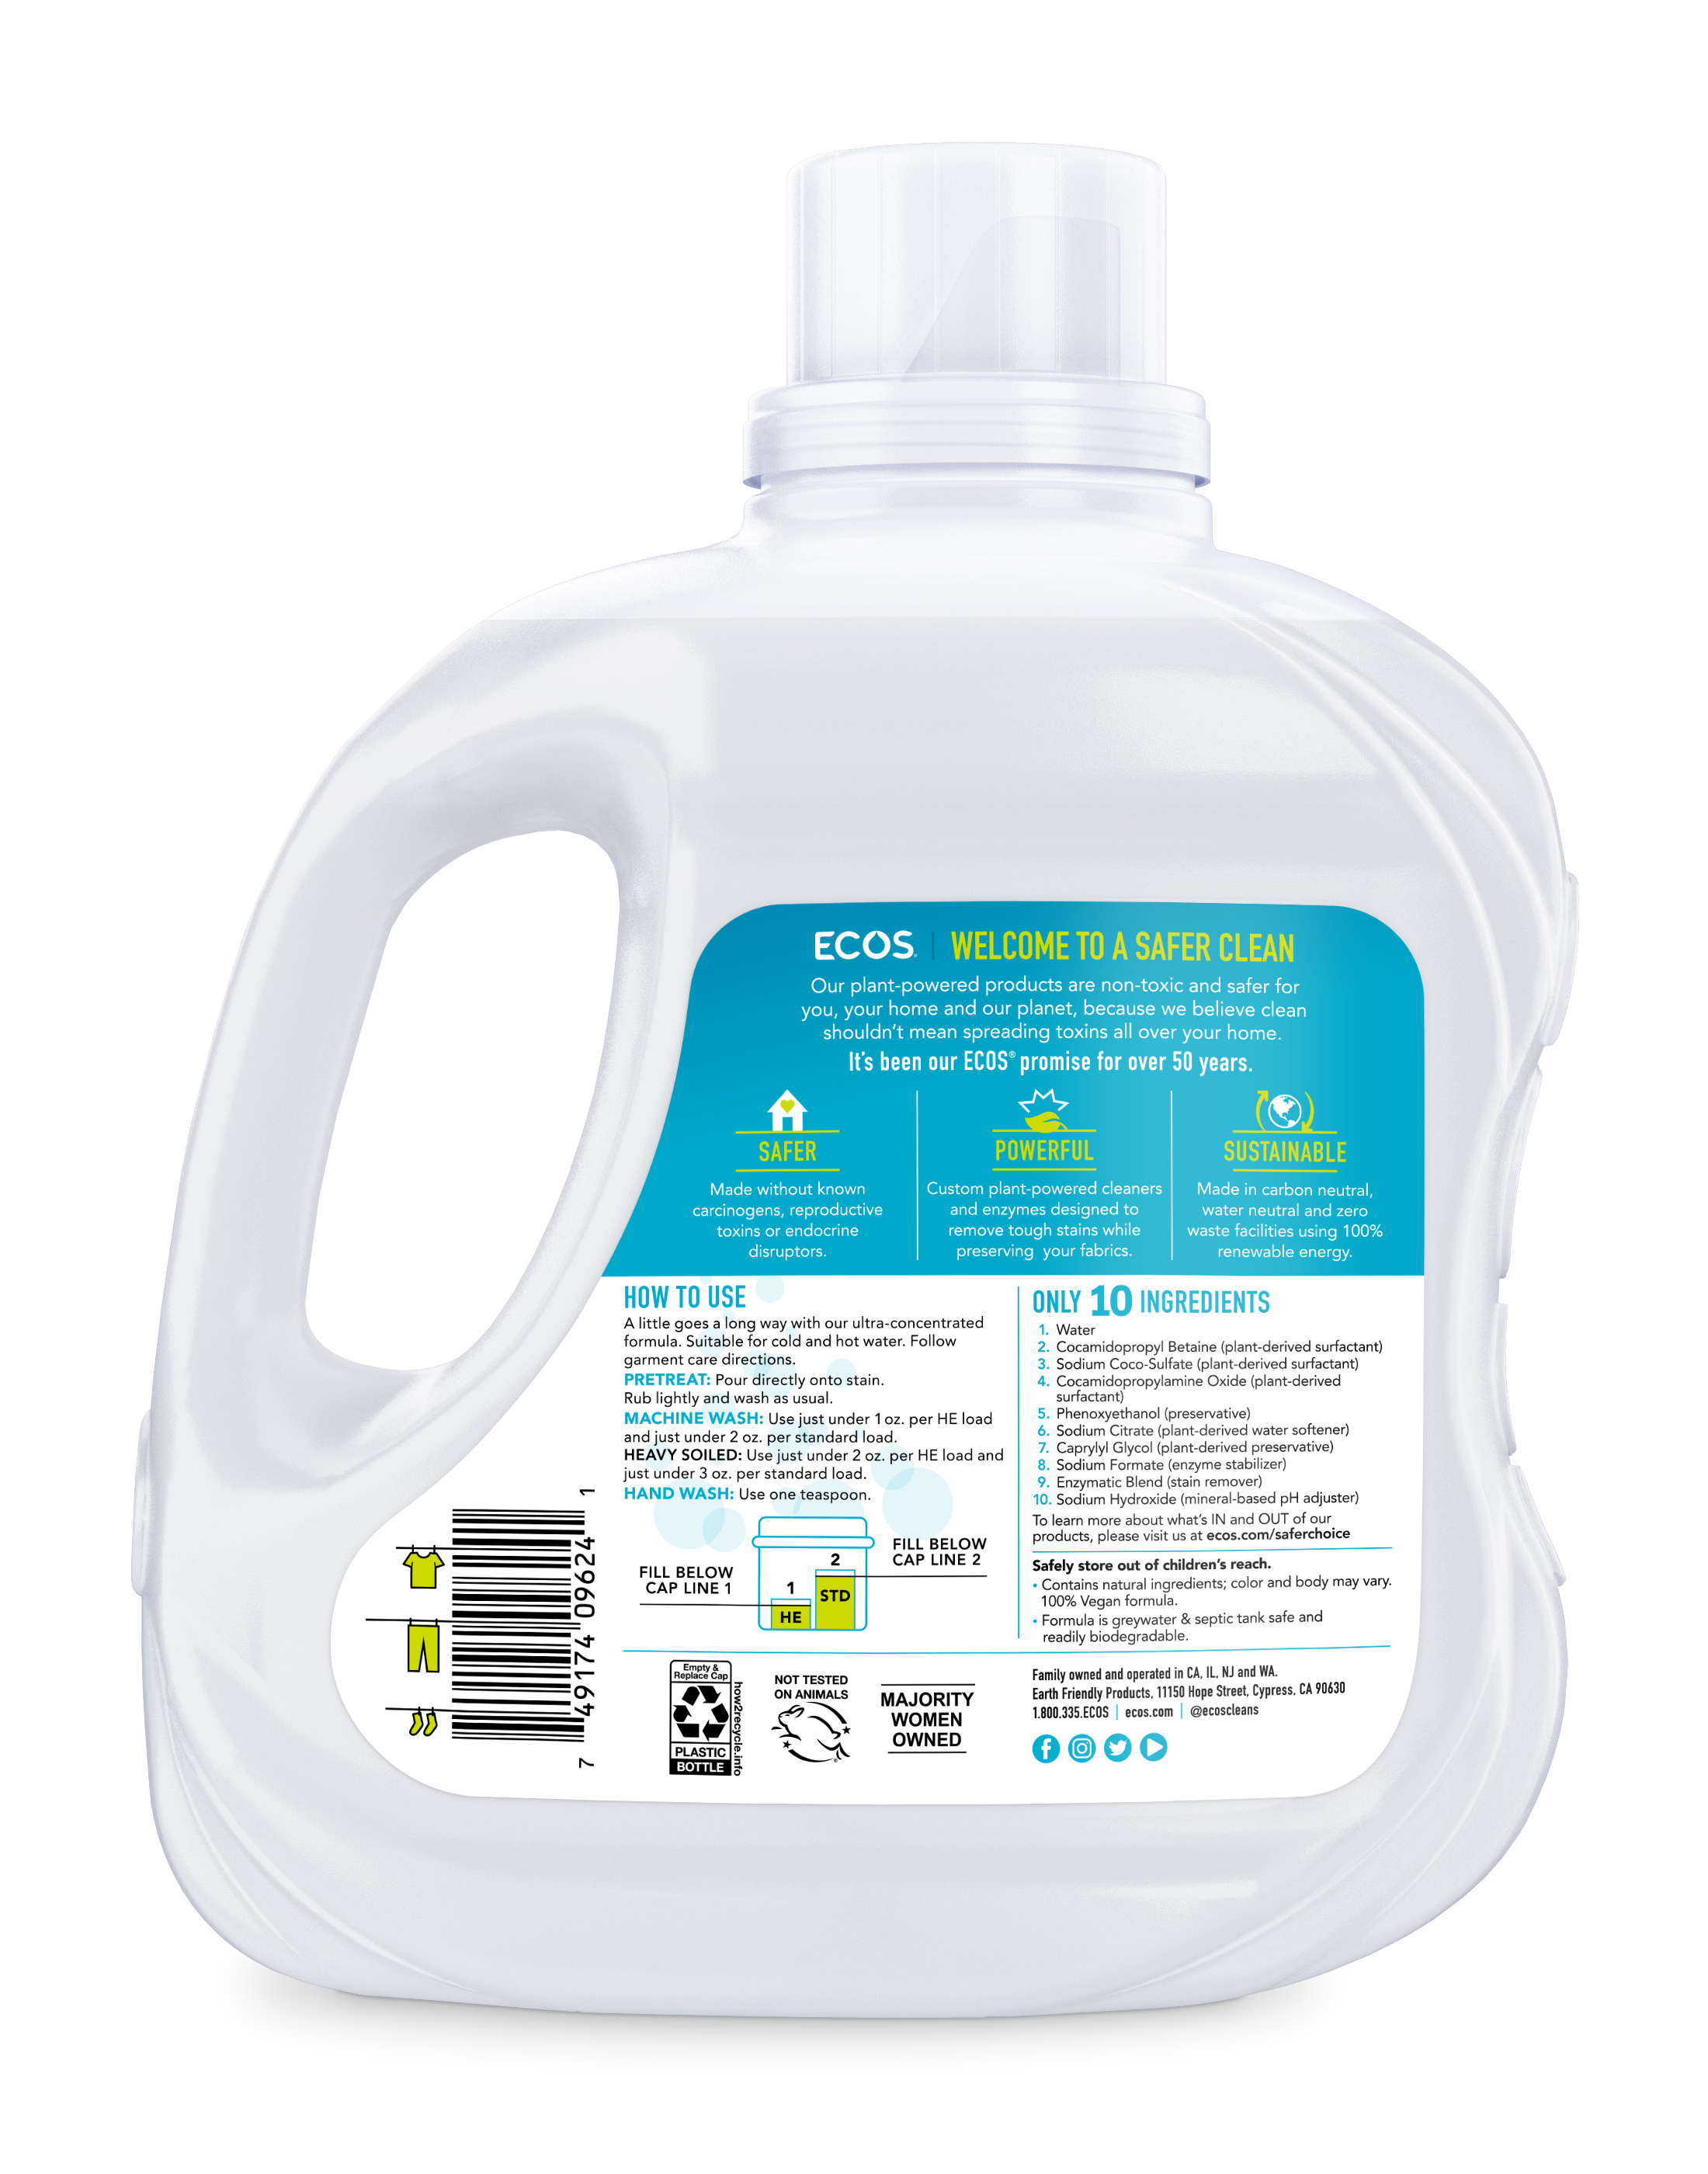 ECOS Plant Powered Liquid Laundry Detergent with Stain-Fighting Enzymes, Free & Clear, 120 Loads, 110 Ounce, Hypoallergenic for sensitive skin - image 2 of 9